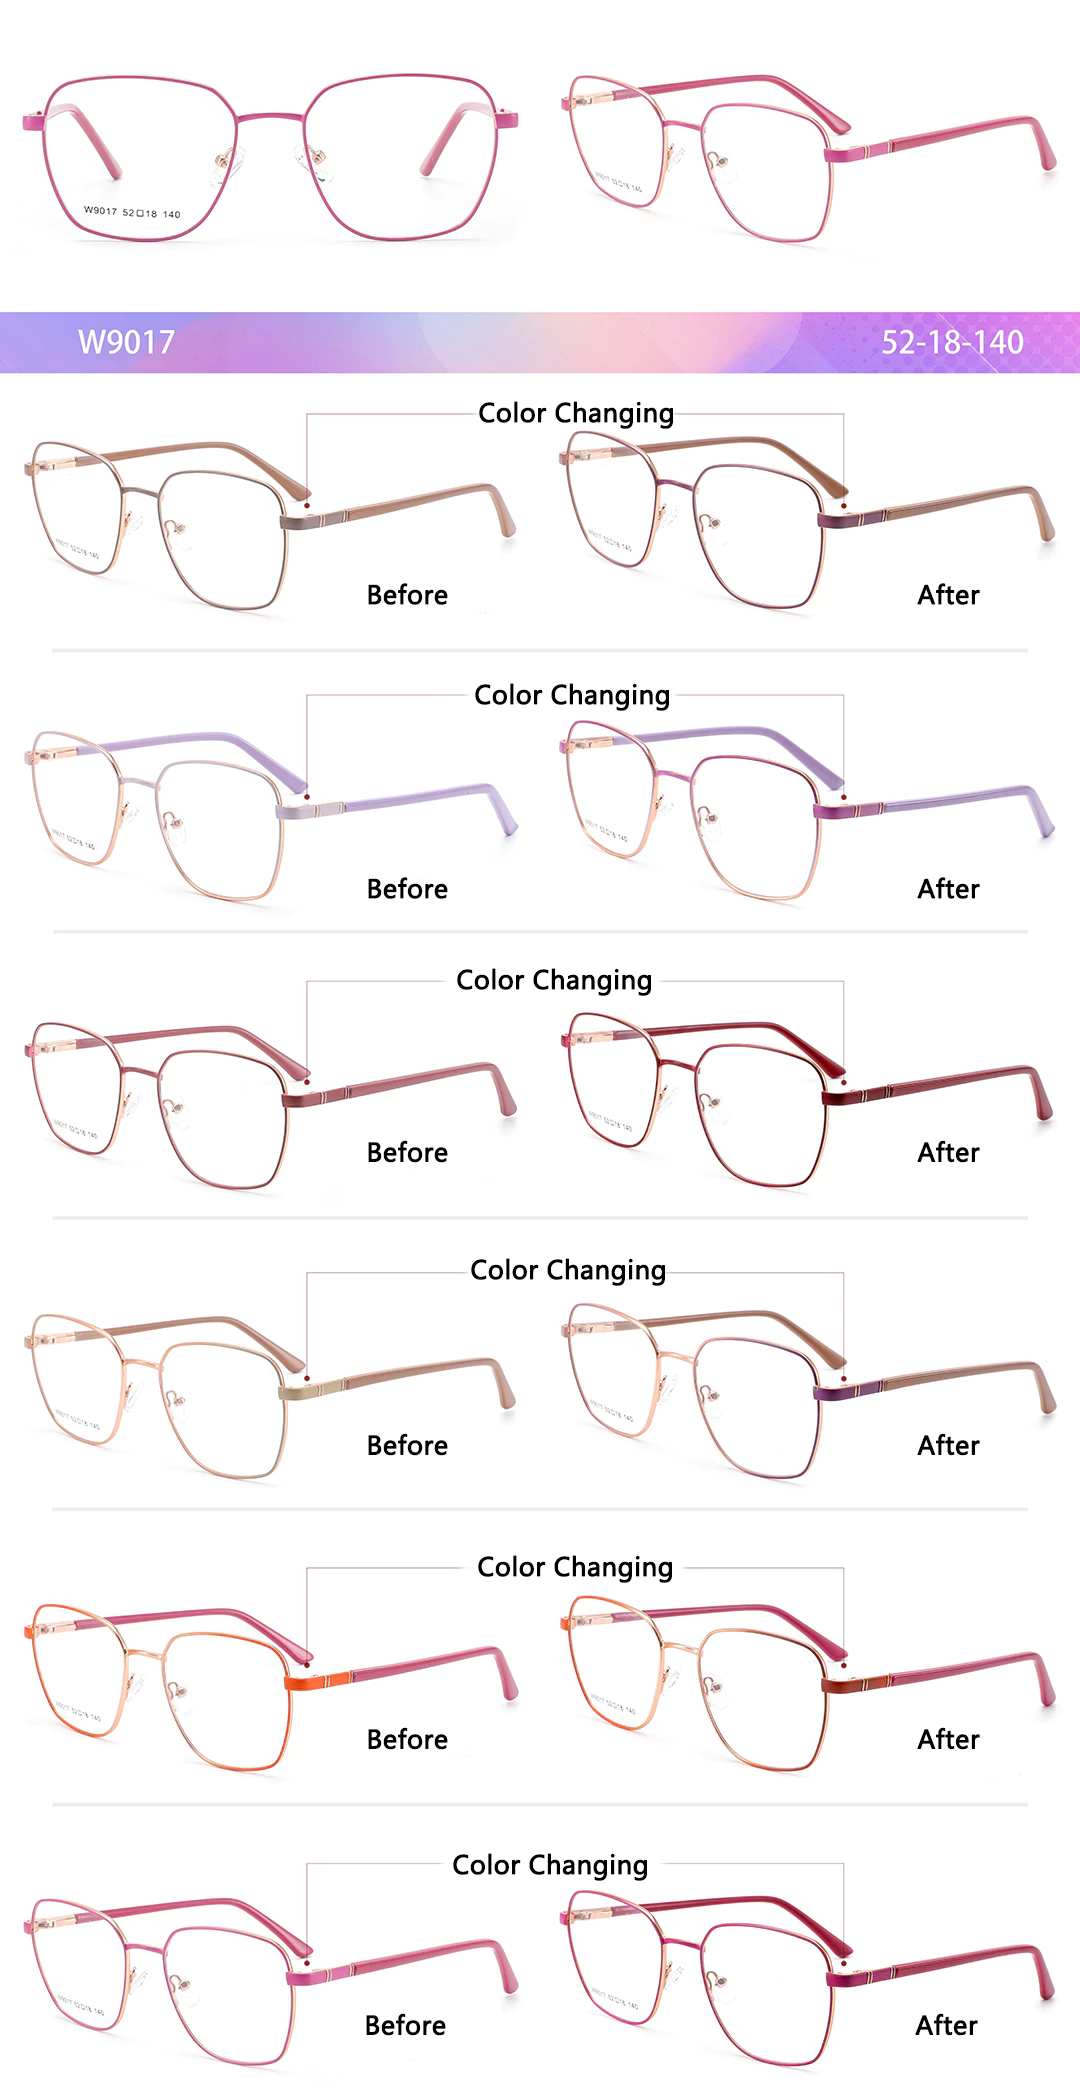 Eyeglasses W9017 Different Color Changing Display, 6 colors